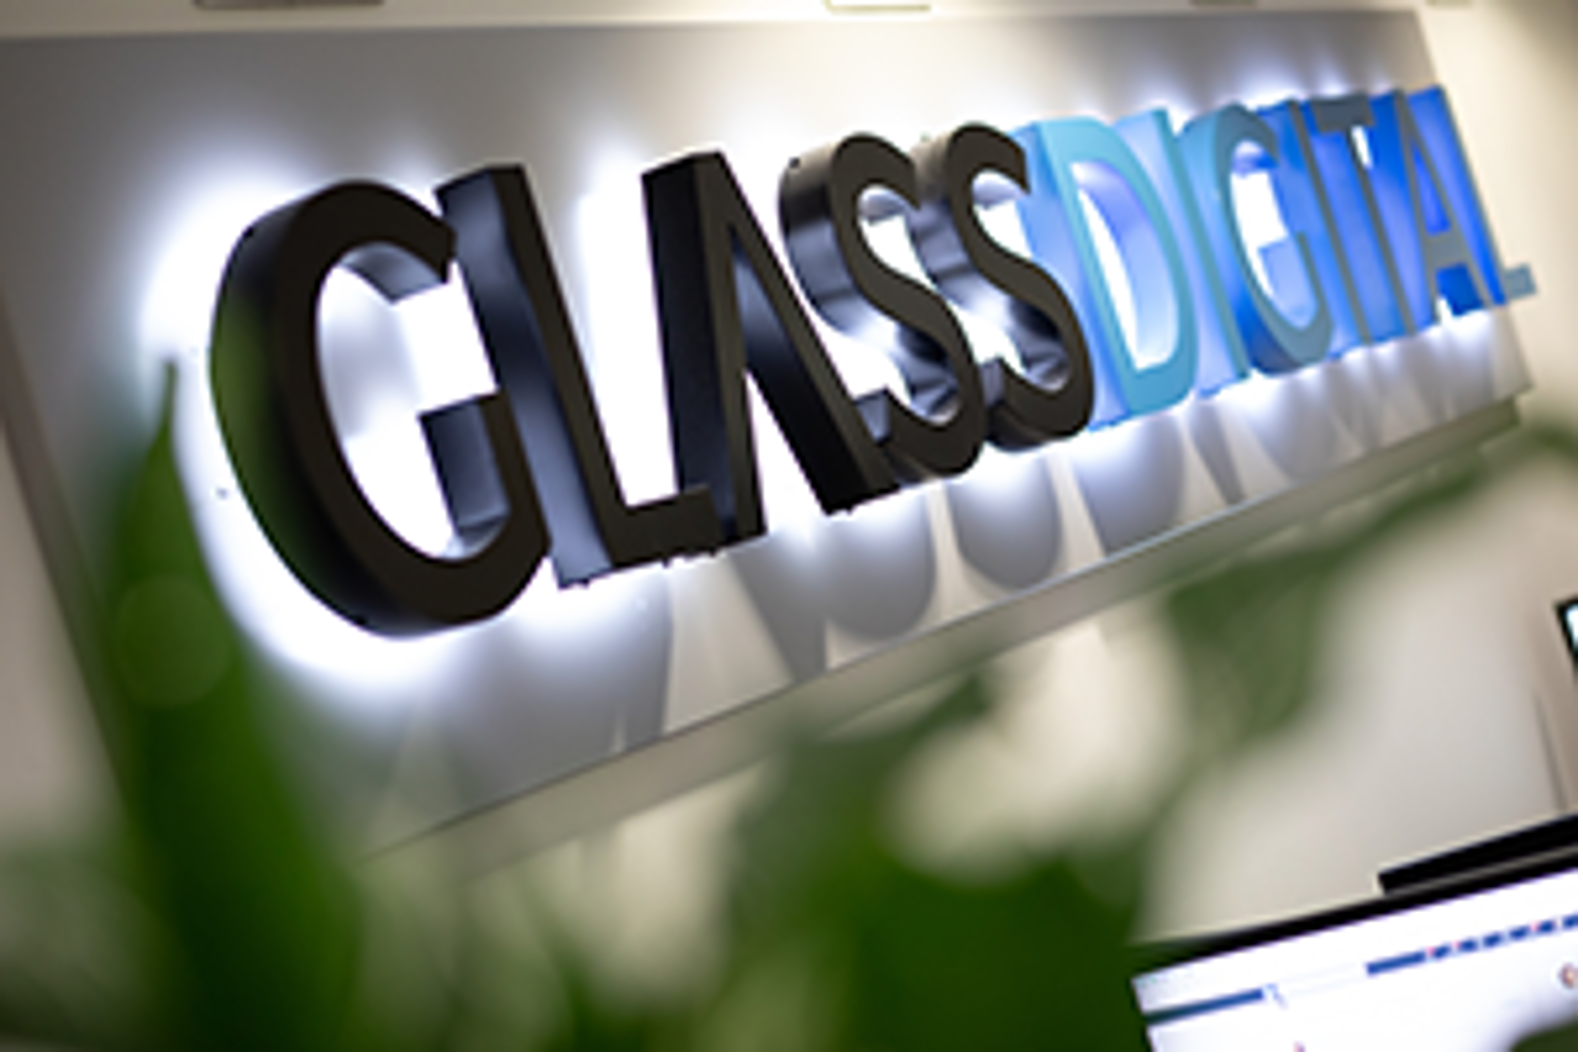 Image: Glass Digital x Denby paid search campaign nominated for major national award